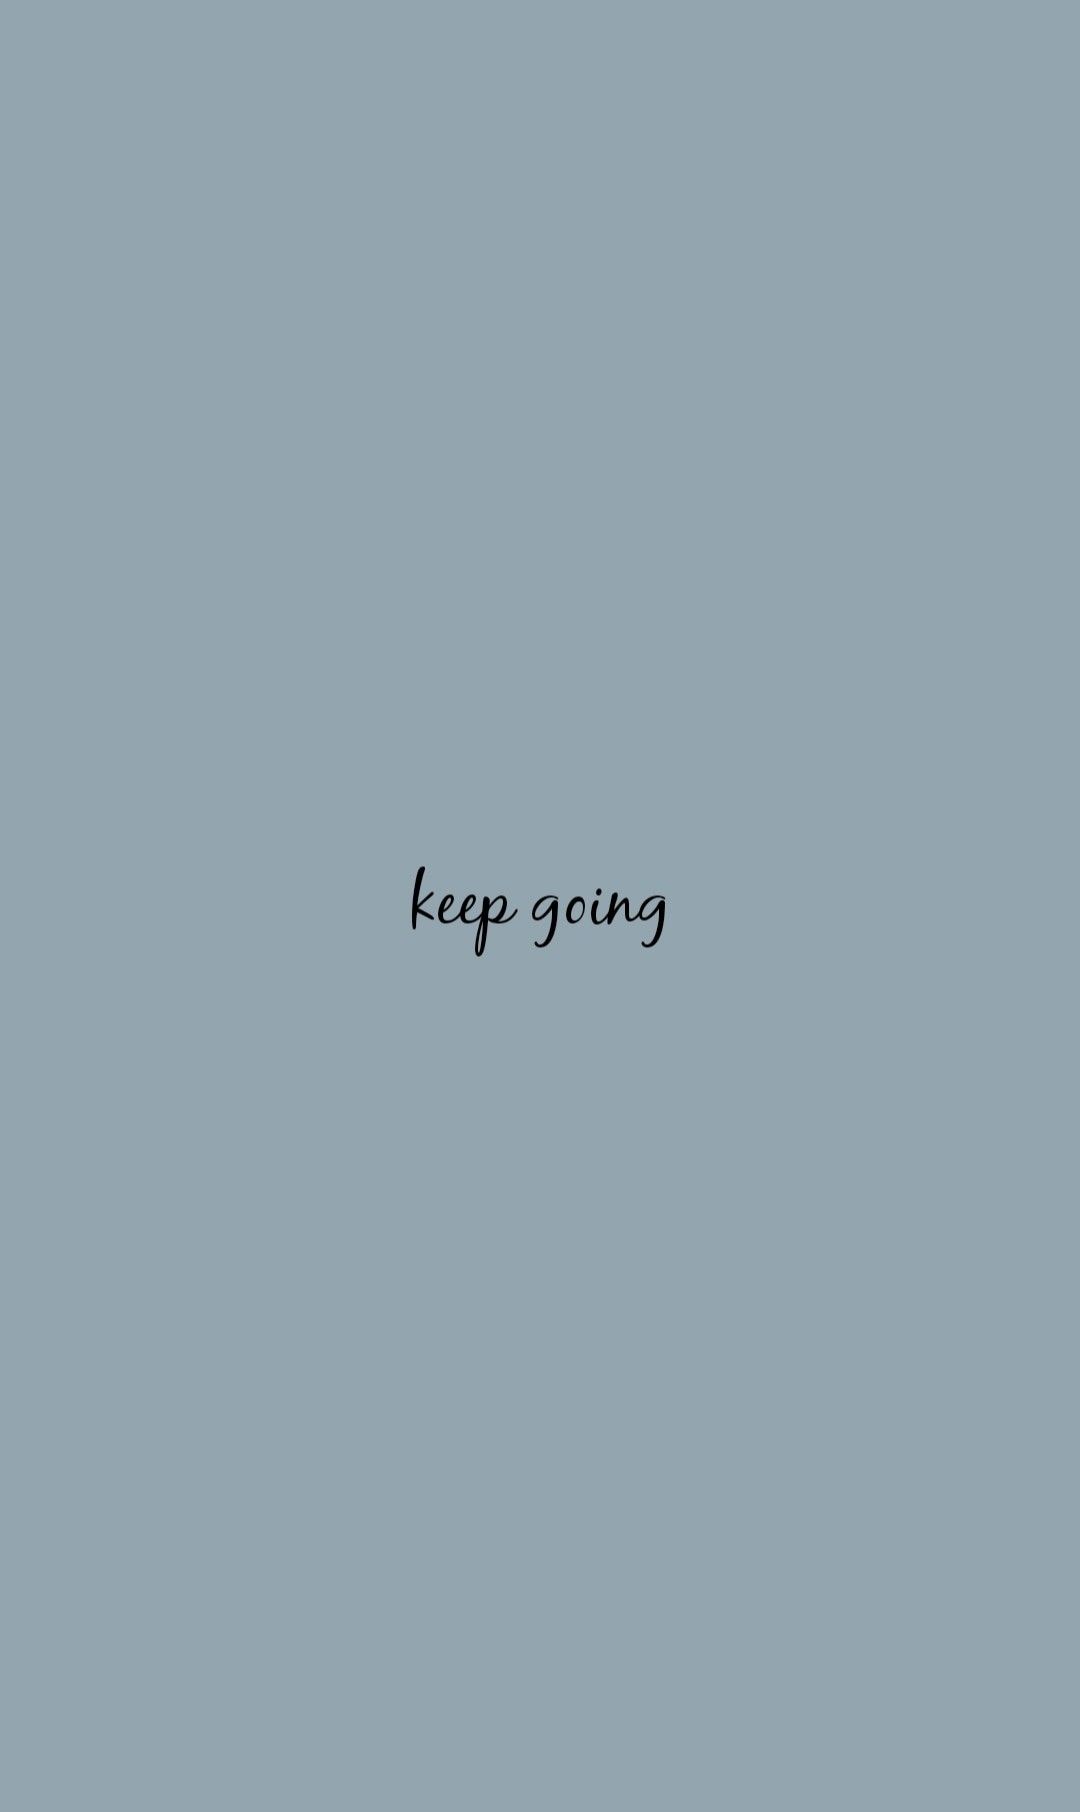 keep going. Keep going quotes, Words wallpaper, Poetry wallpaper